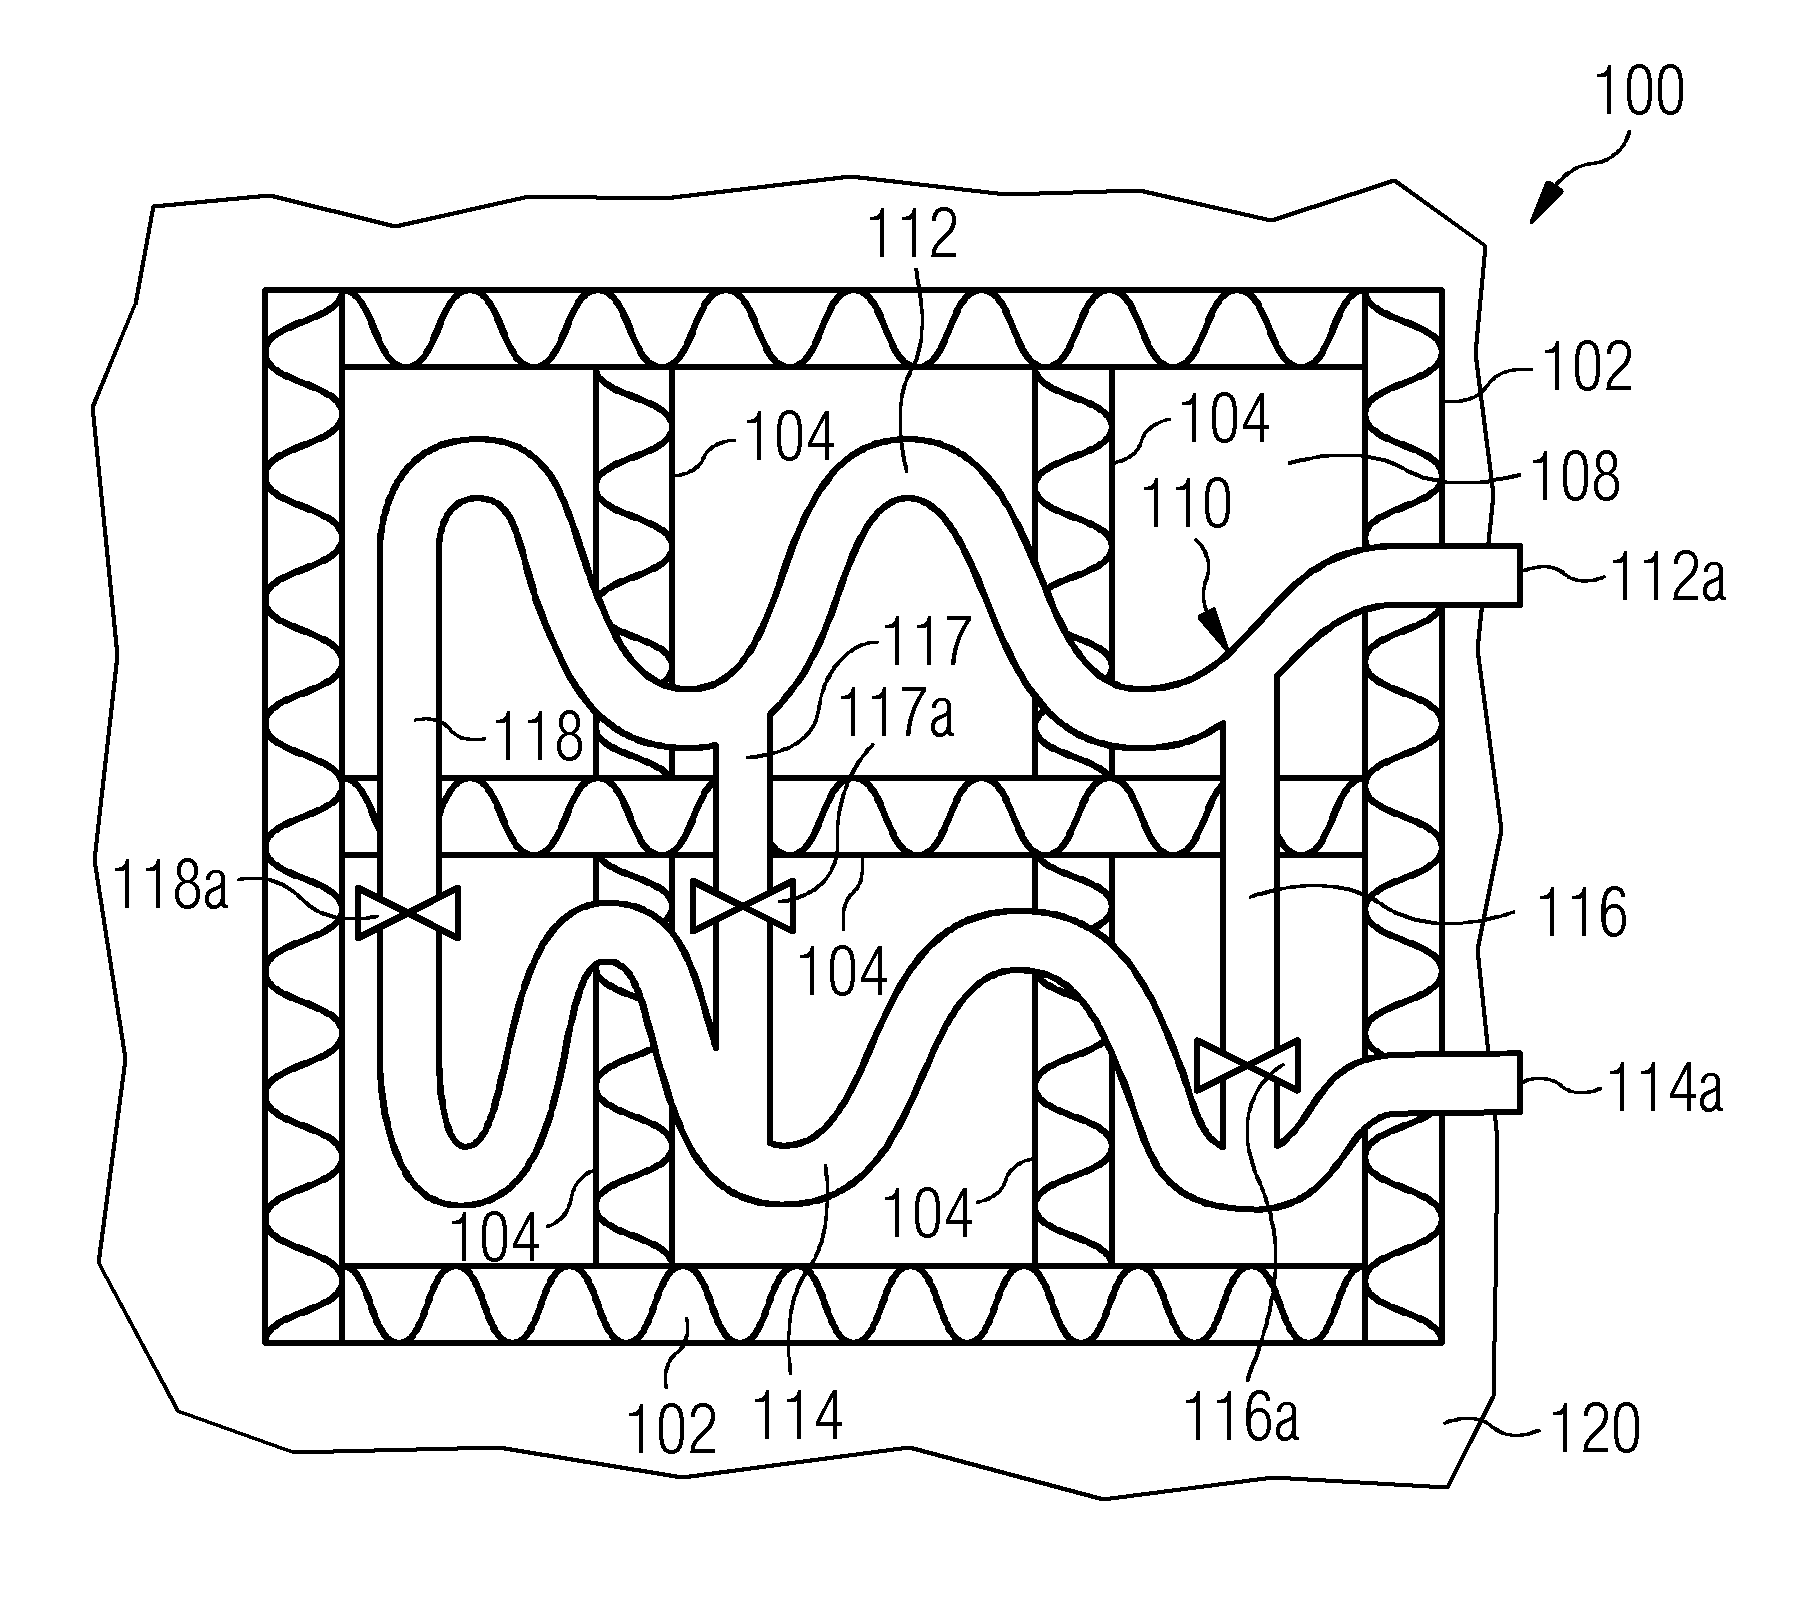 Thermal energy storage and recovery device and system having a heat exchanger arrangement using a compressed gas